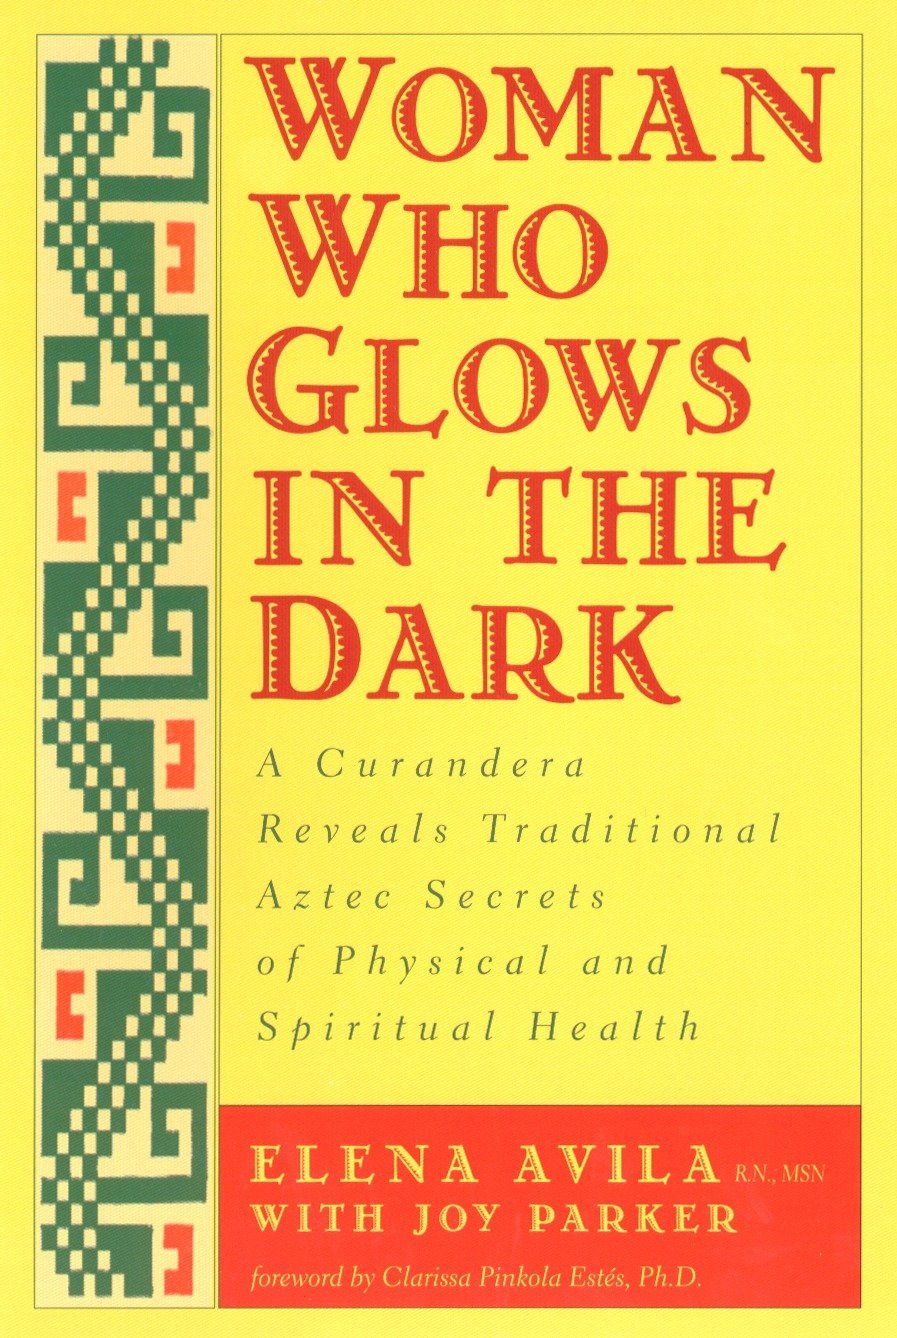 Woman Who Glows in the Dark: A Curandera Reveals Traditional Aztec Secrets of Physical and Spiritual Health (Copy) (Copy)